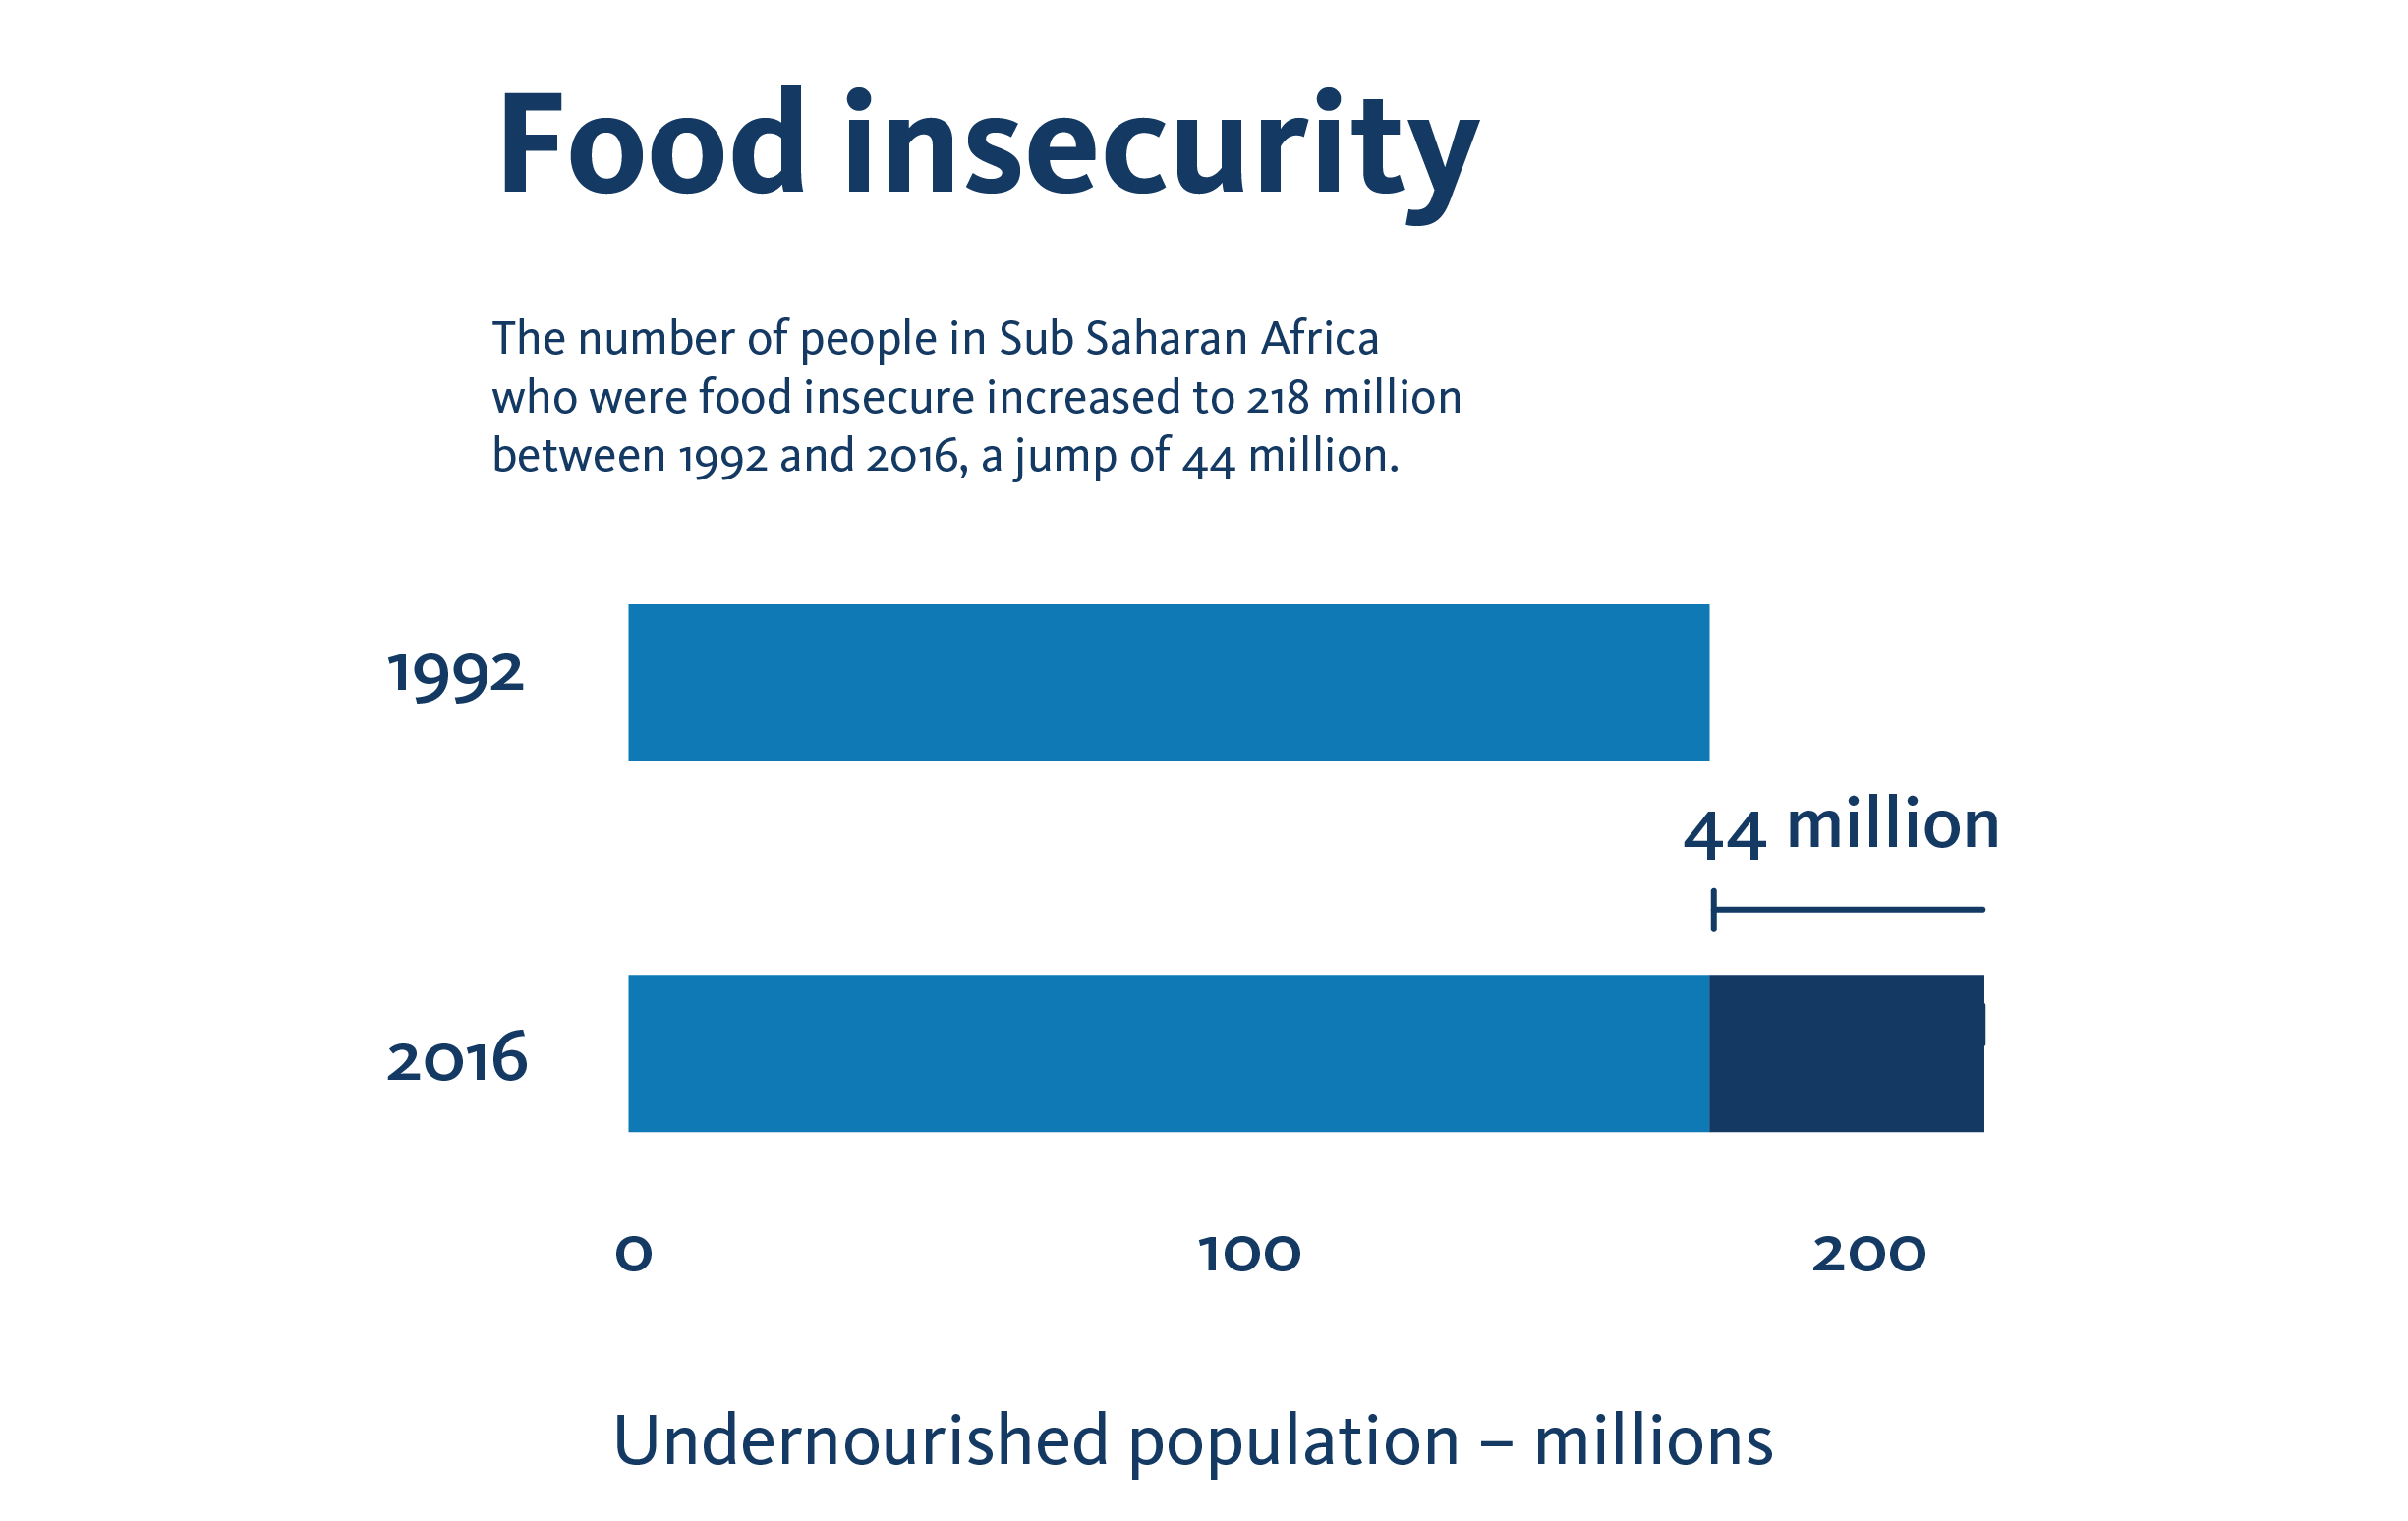 Infographic: The number of people in Sub Saharan Africa who were food insecure increased to 218 million between 1992 and 2016, a jump of 44 million.